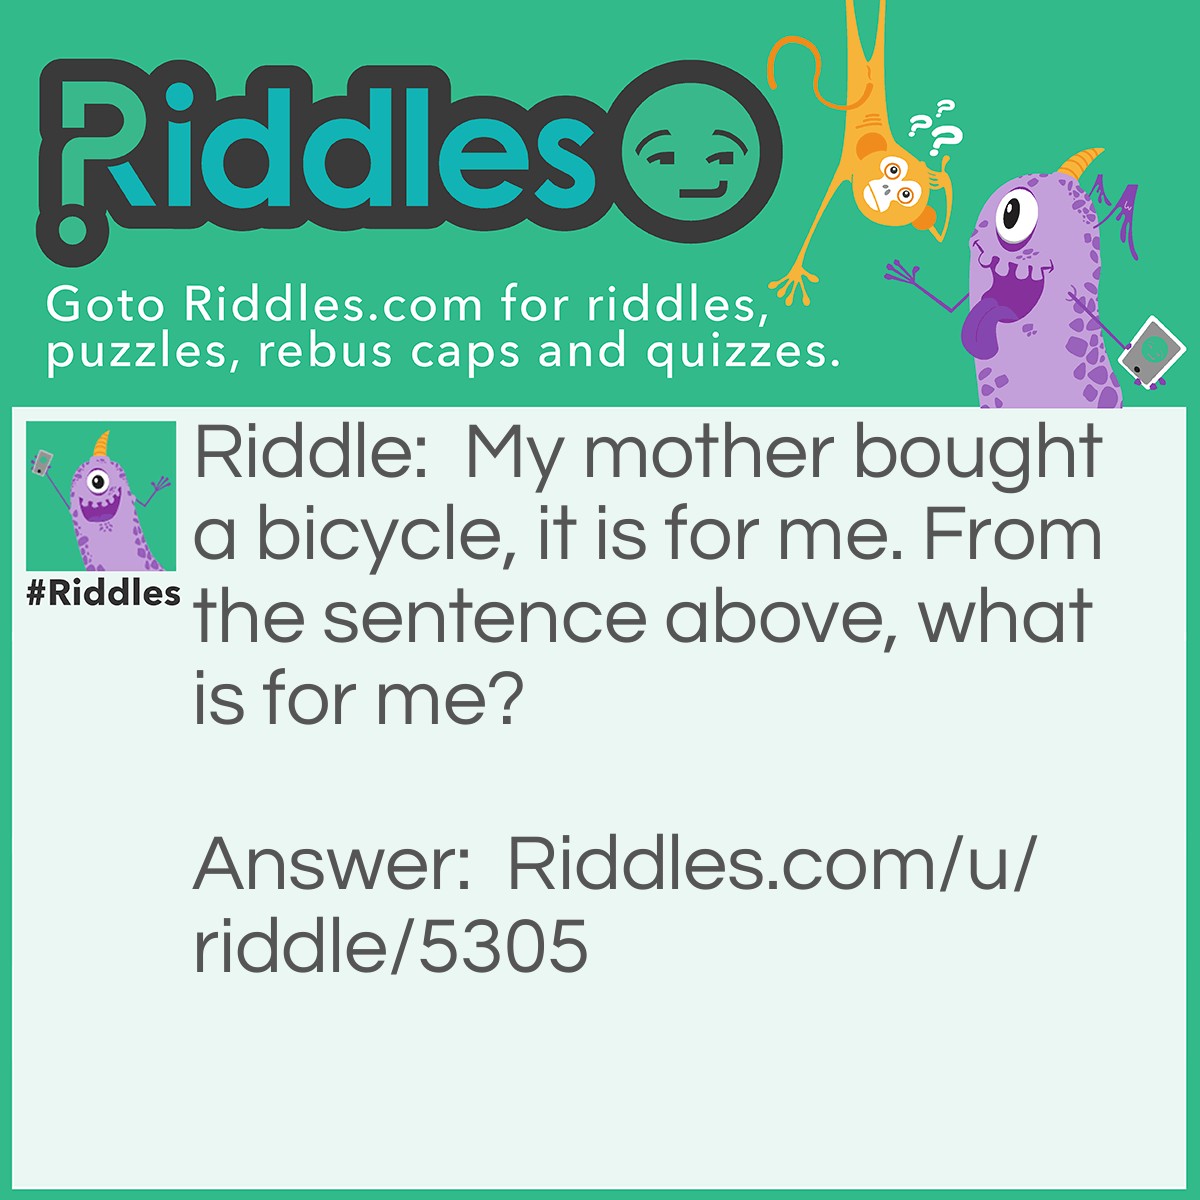 Riddle: My mother bought a bicycle, it is for me. From the sentence above, what is for me? Answer: 'it'.